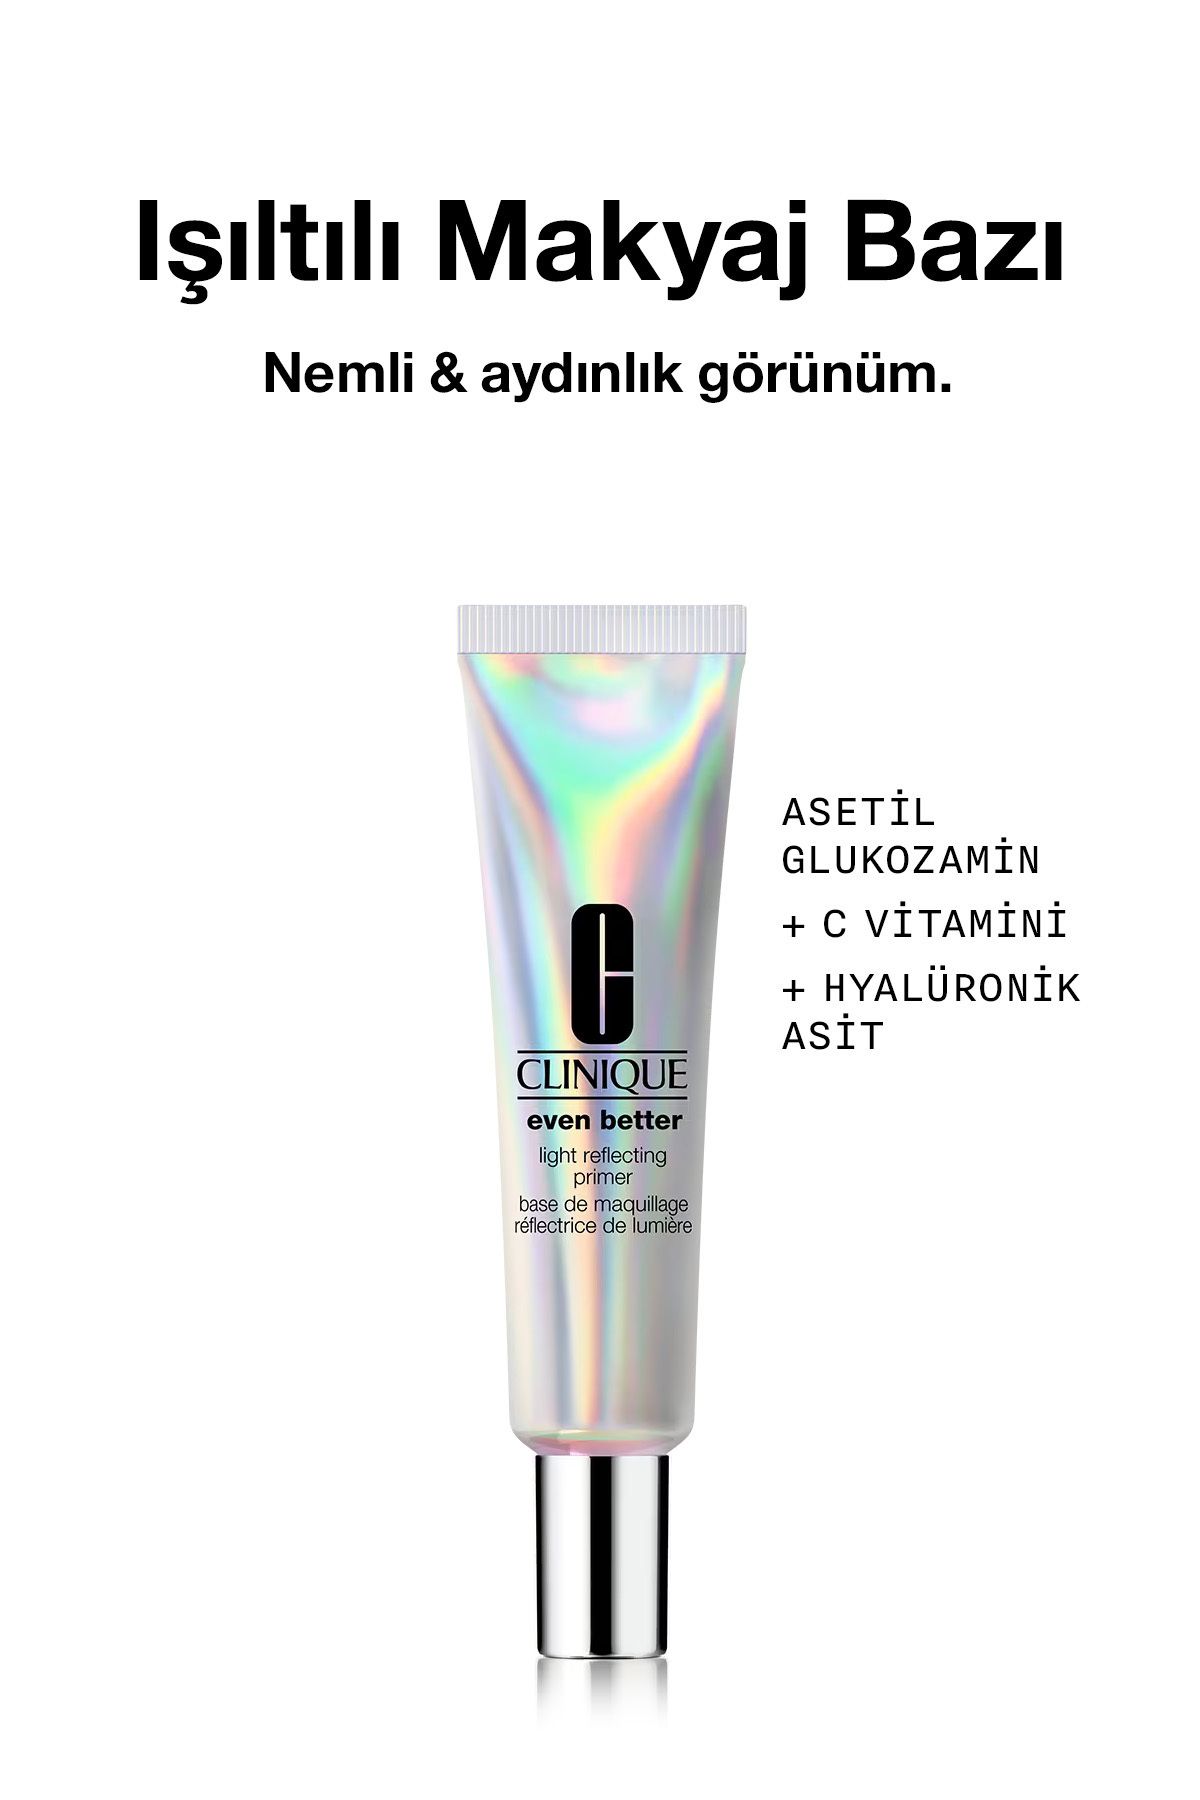 Clinique EVEN BETTER SKİN BRİGHTENİNG RADİANT MAKEUP BASE 30ML DEMBA2901